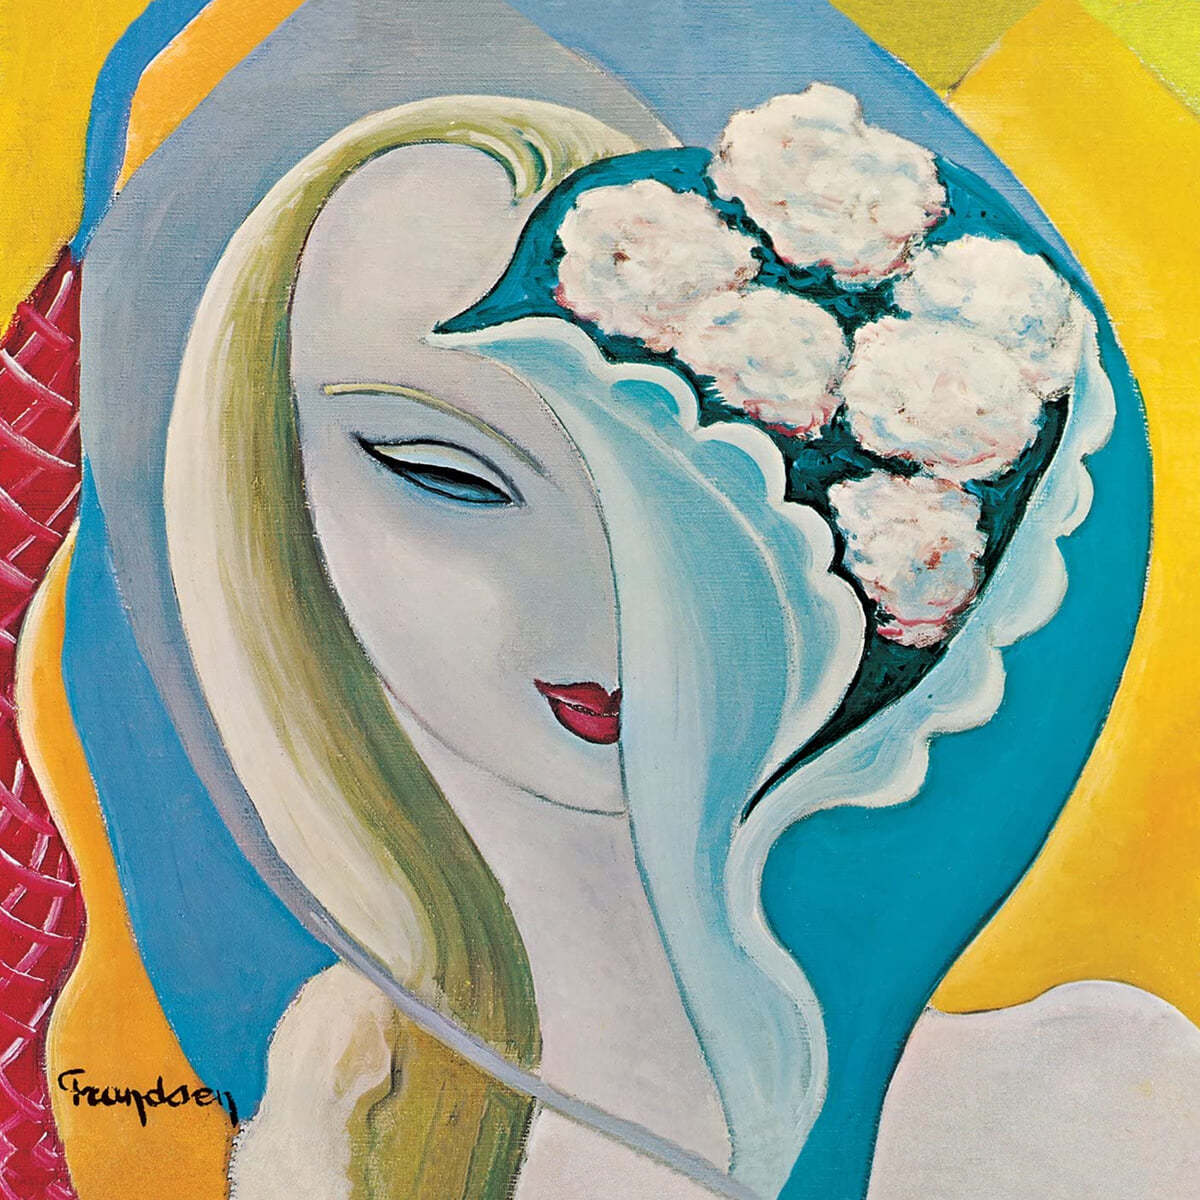 Derek & The Dominos - Layla & The Other Assorted Love Songs [2LP] 